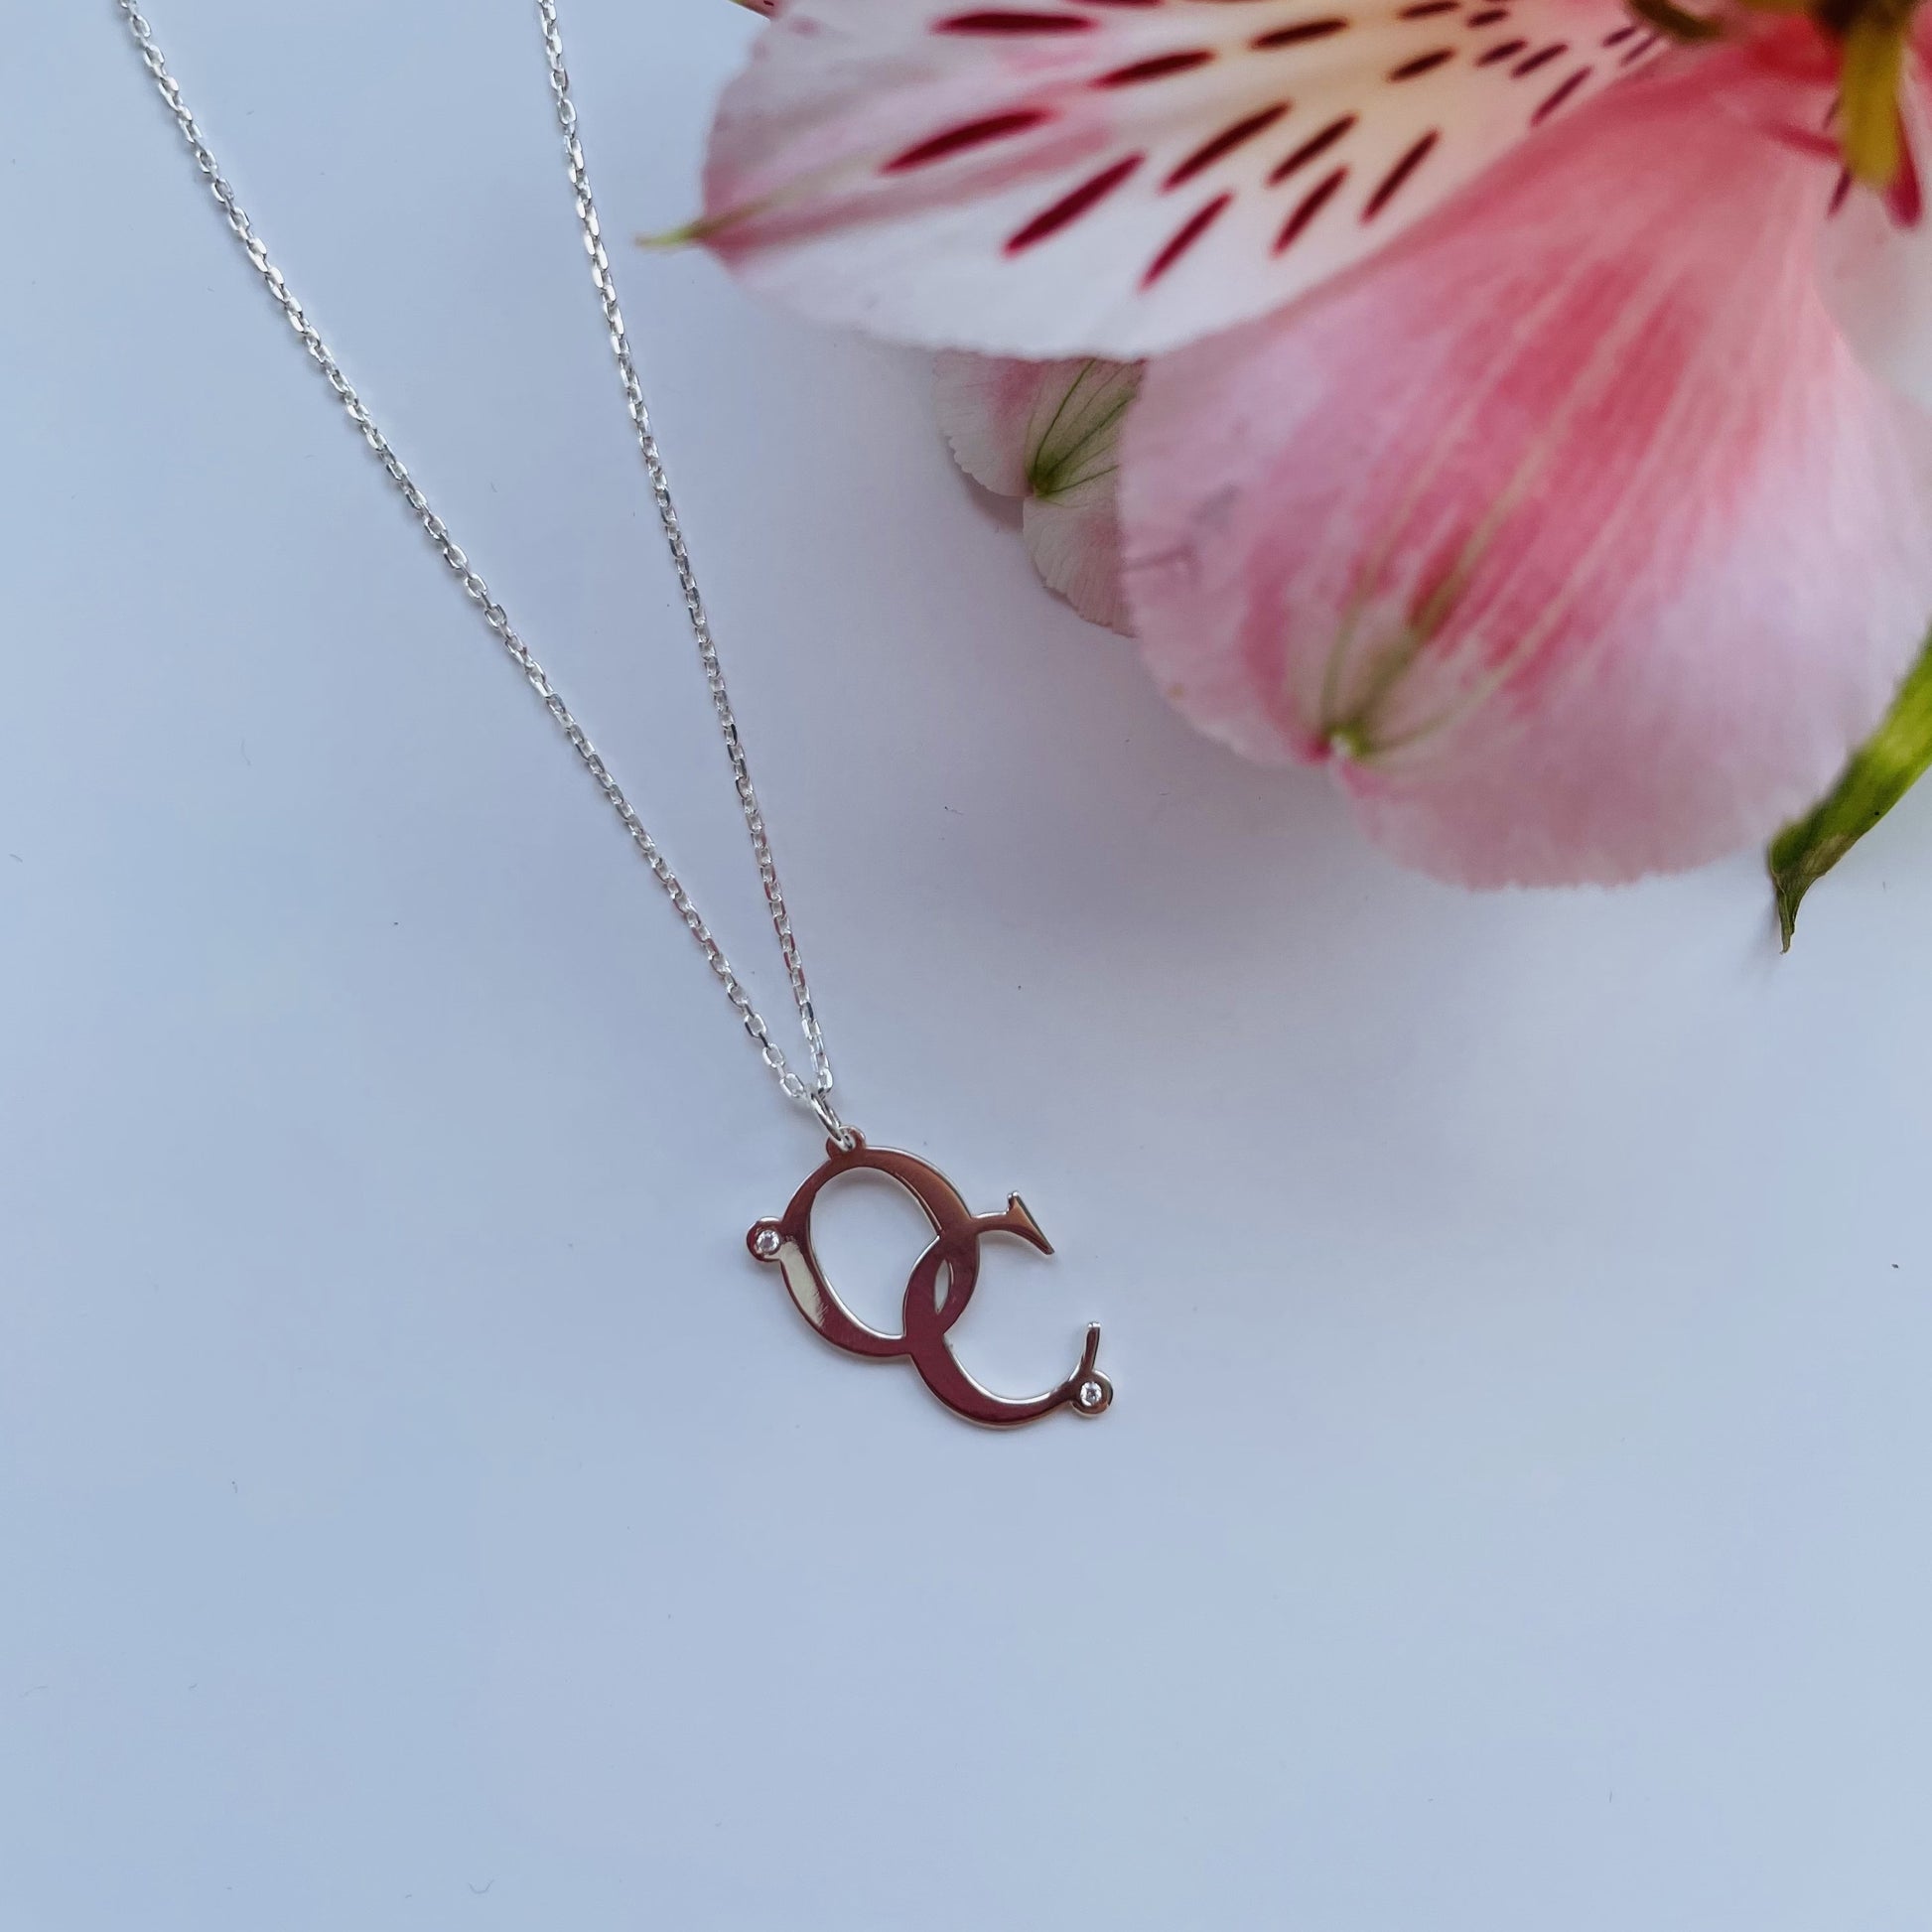 MY TWO LETTERS necklace - BYVELA jewellery